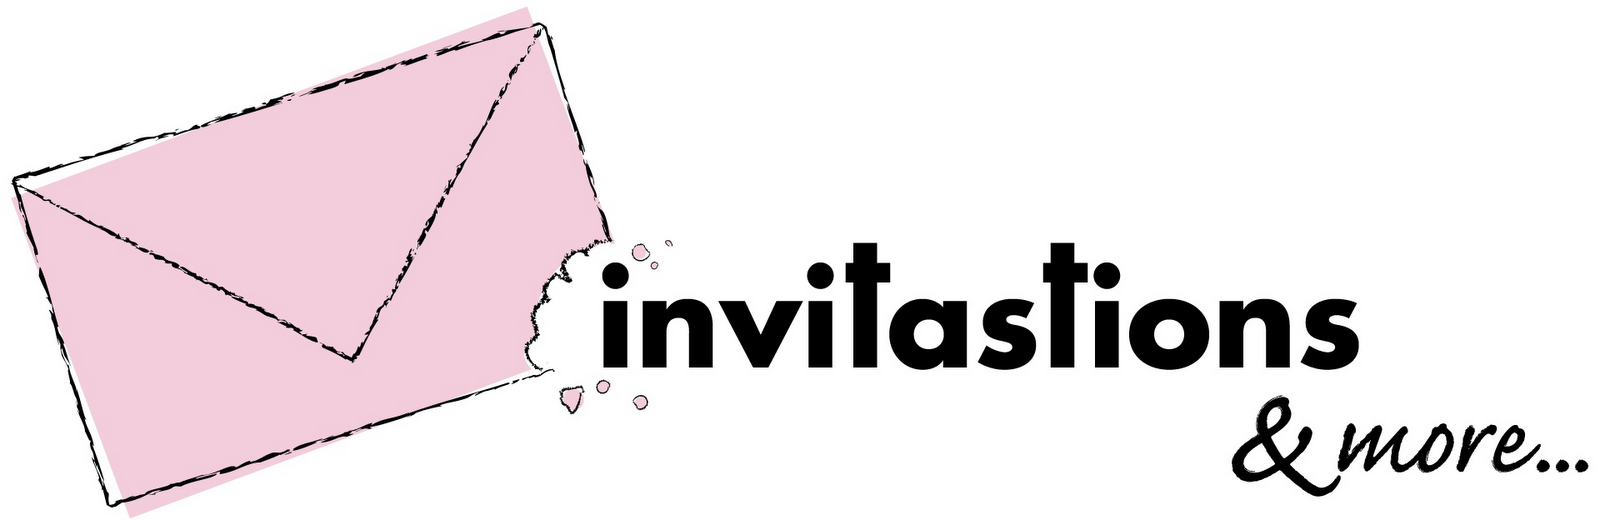 [Invitastions_Logo.png]